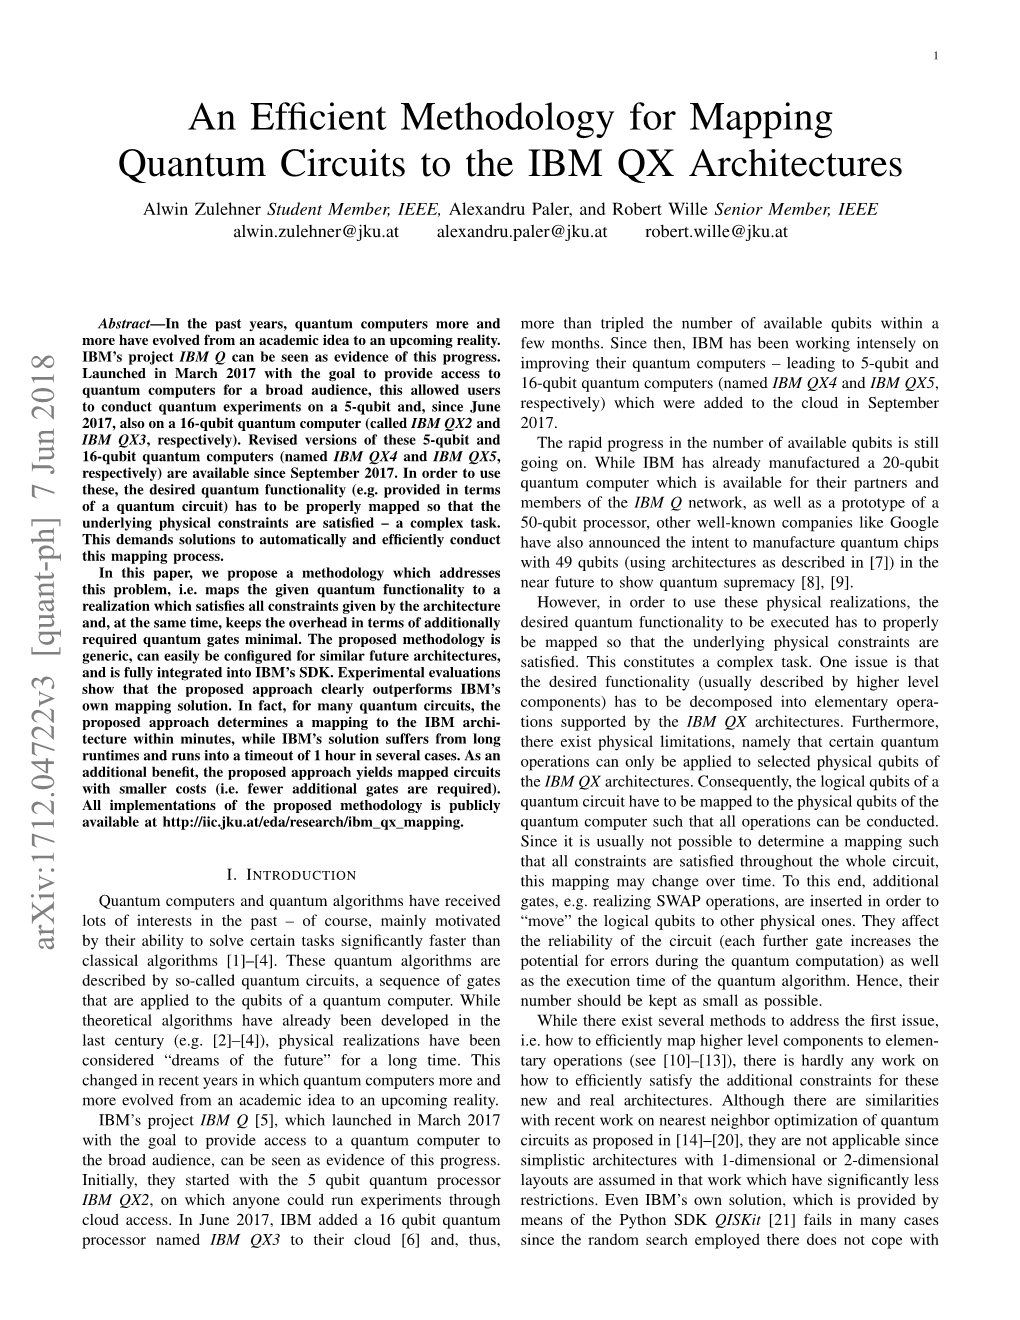 An Efficient Methodology for Mapping Quantum Circuits to the IBM QX